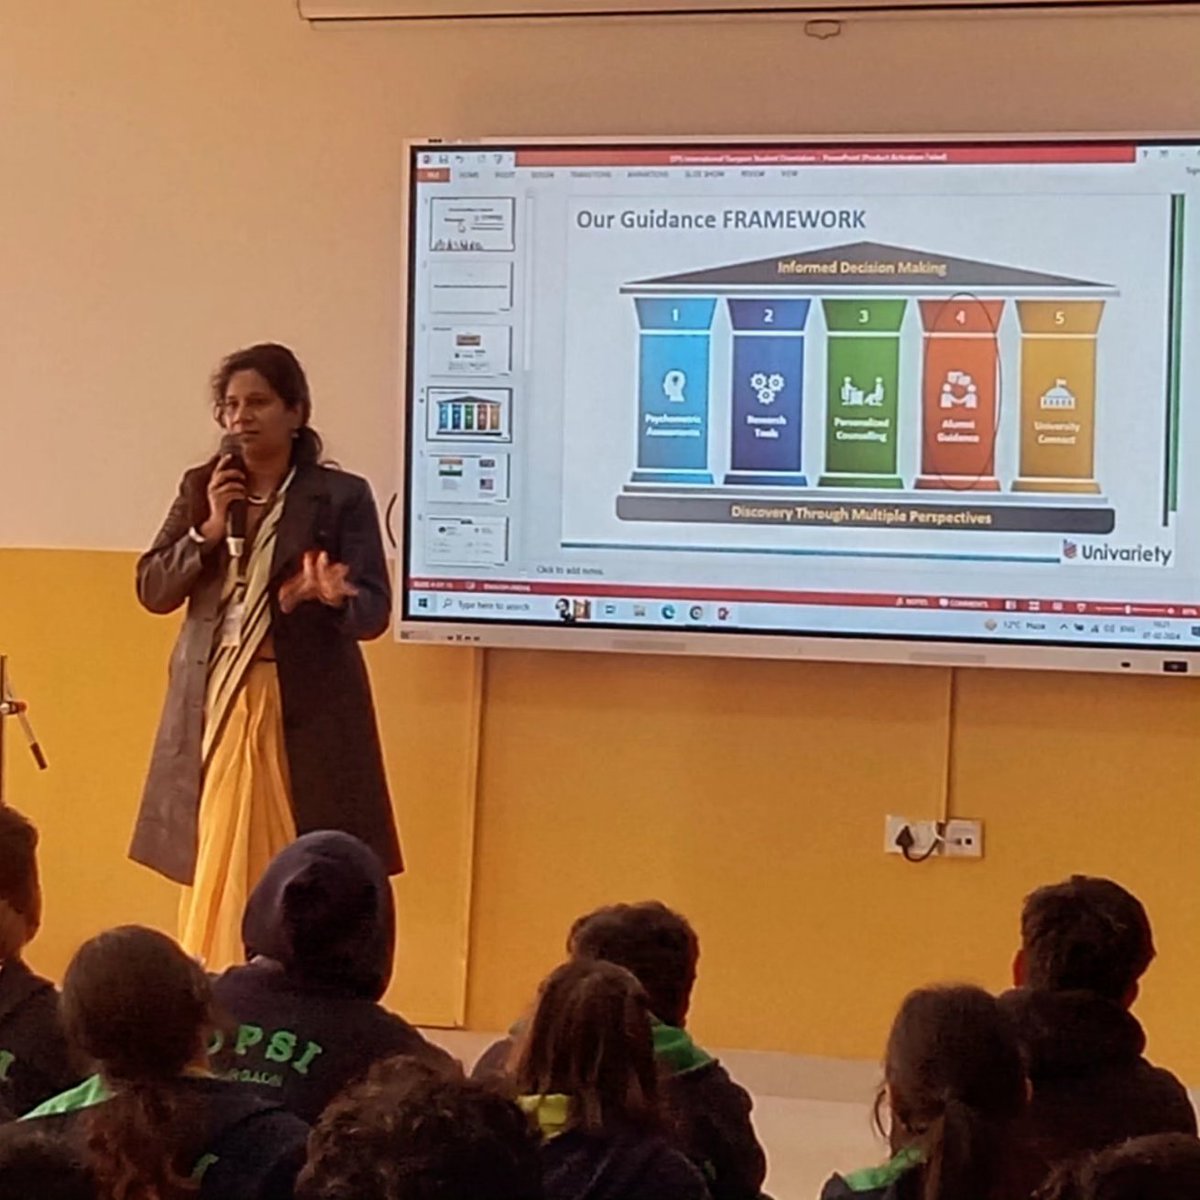 Empowering Minds: Recap of Today's Student Workshop at DPS International, Gurgaon
A Day of Dynamic Learning and Enthusiastic Engagement Leaves Everyone Feeling Inspired!

#studentcounselling
#academiccounselor 
#careercounselor 
#futureoption
#counsellingsession
#educounselling